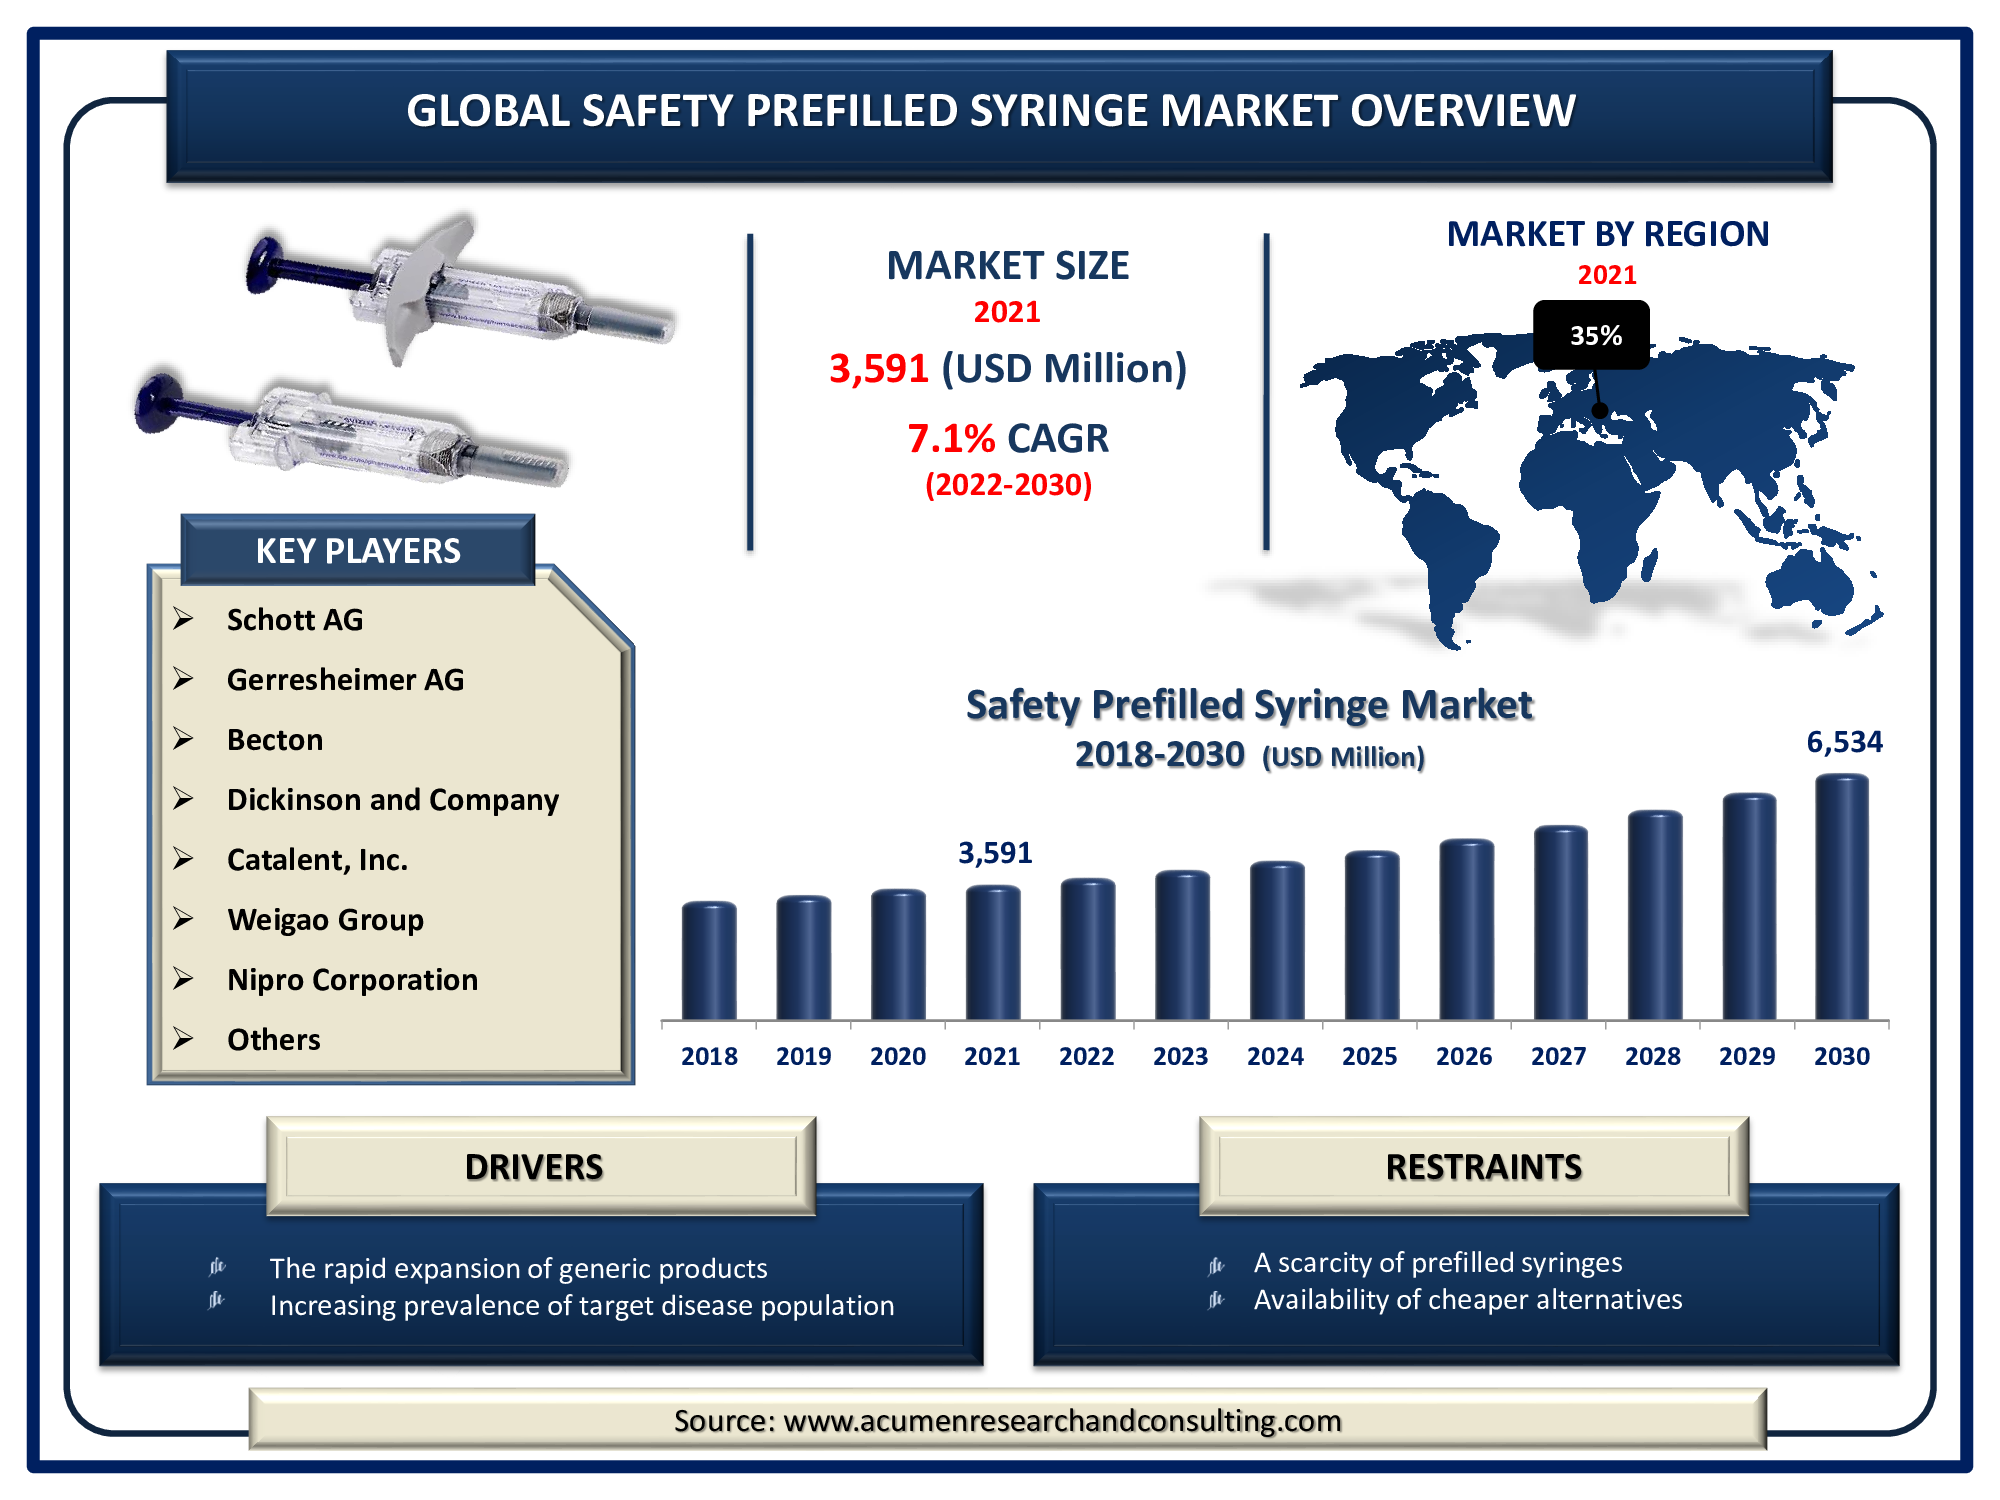 The Global Safety Prefilled Syringe Market Size Accounted for USD 3,591 Million in 2021 and is predicted to be worth USD 6,534 Million by 2030, with a CAGR of 7.1% during the Forthcoming Period from 2022 to 2030.